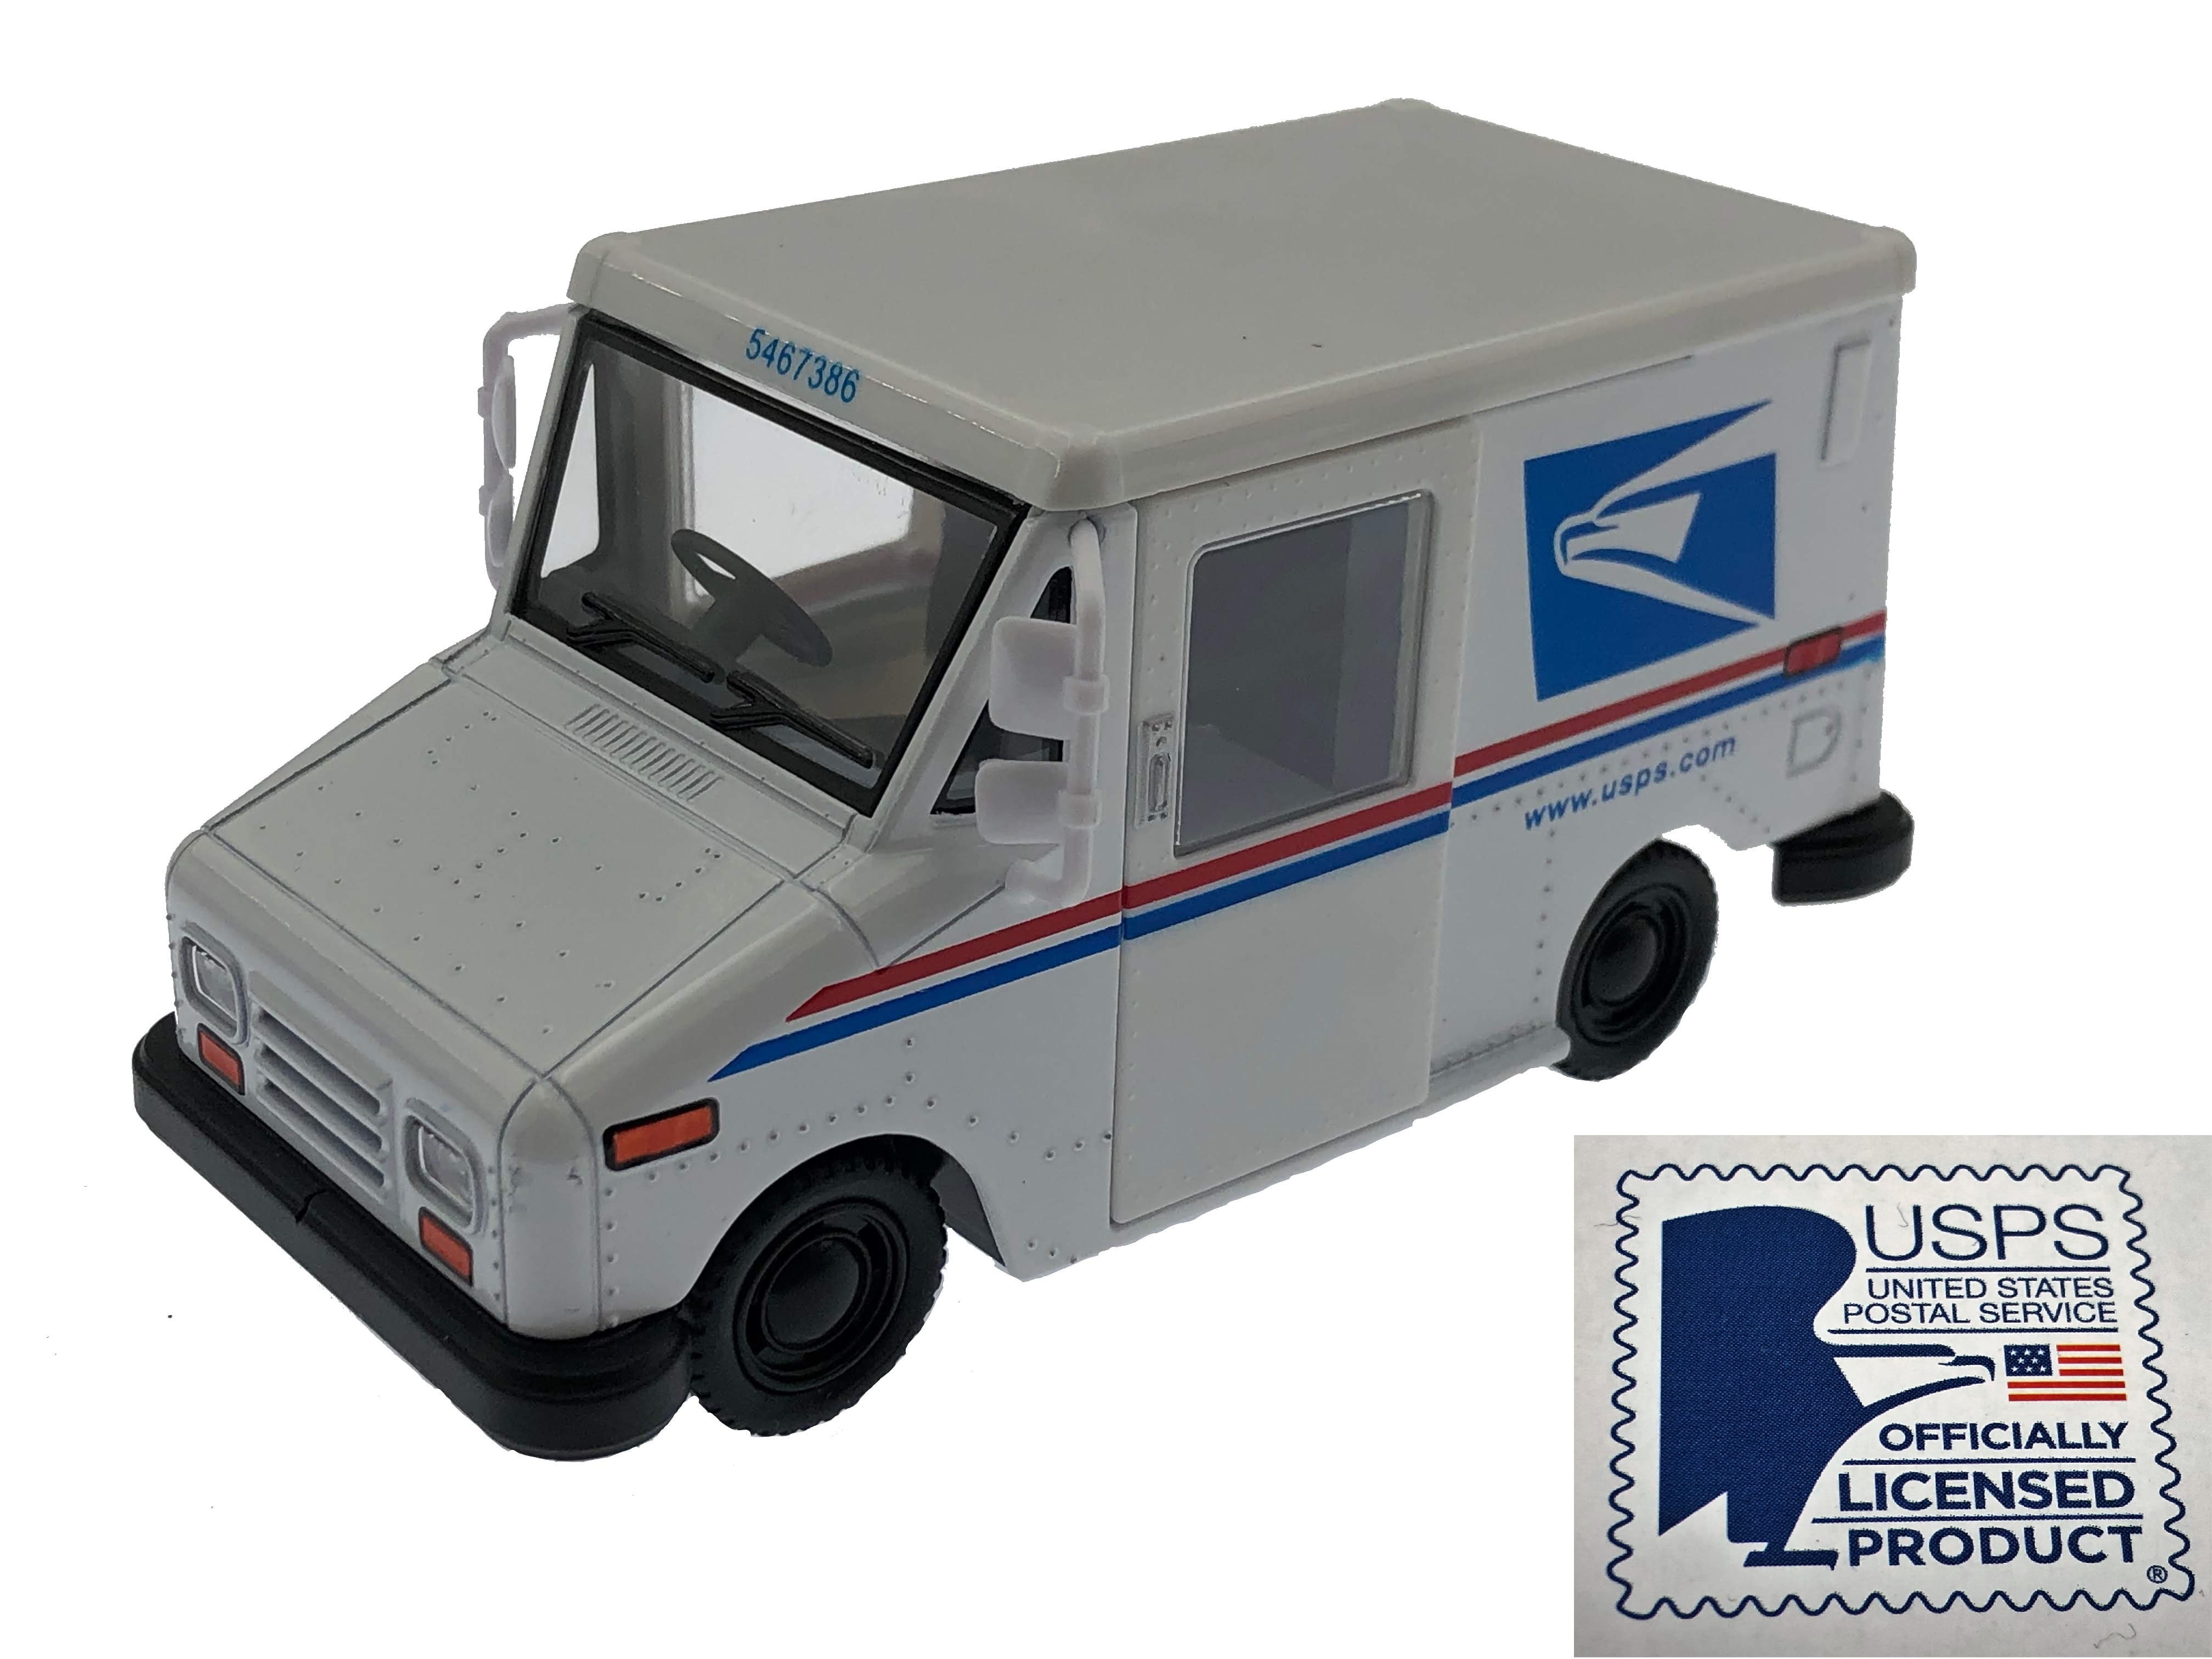 Mail Delivery Truck HCK Postal Service Diecast Model Toy Car in White U.S 